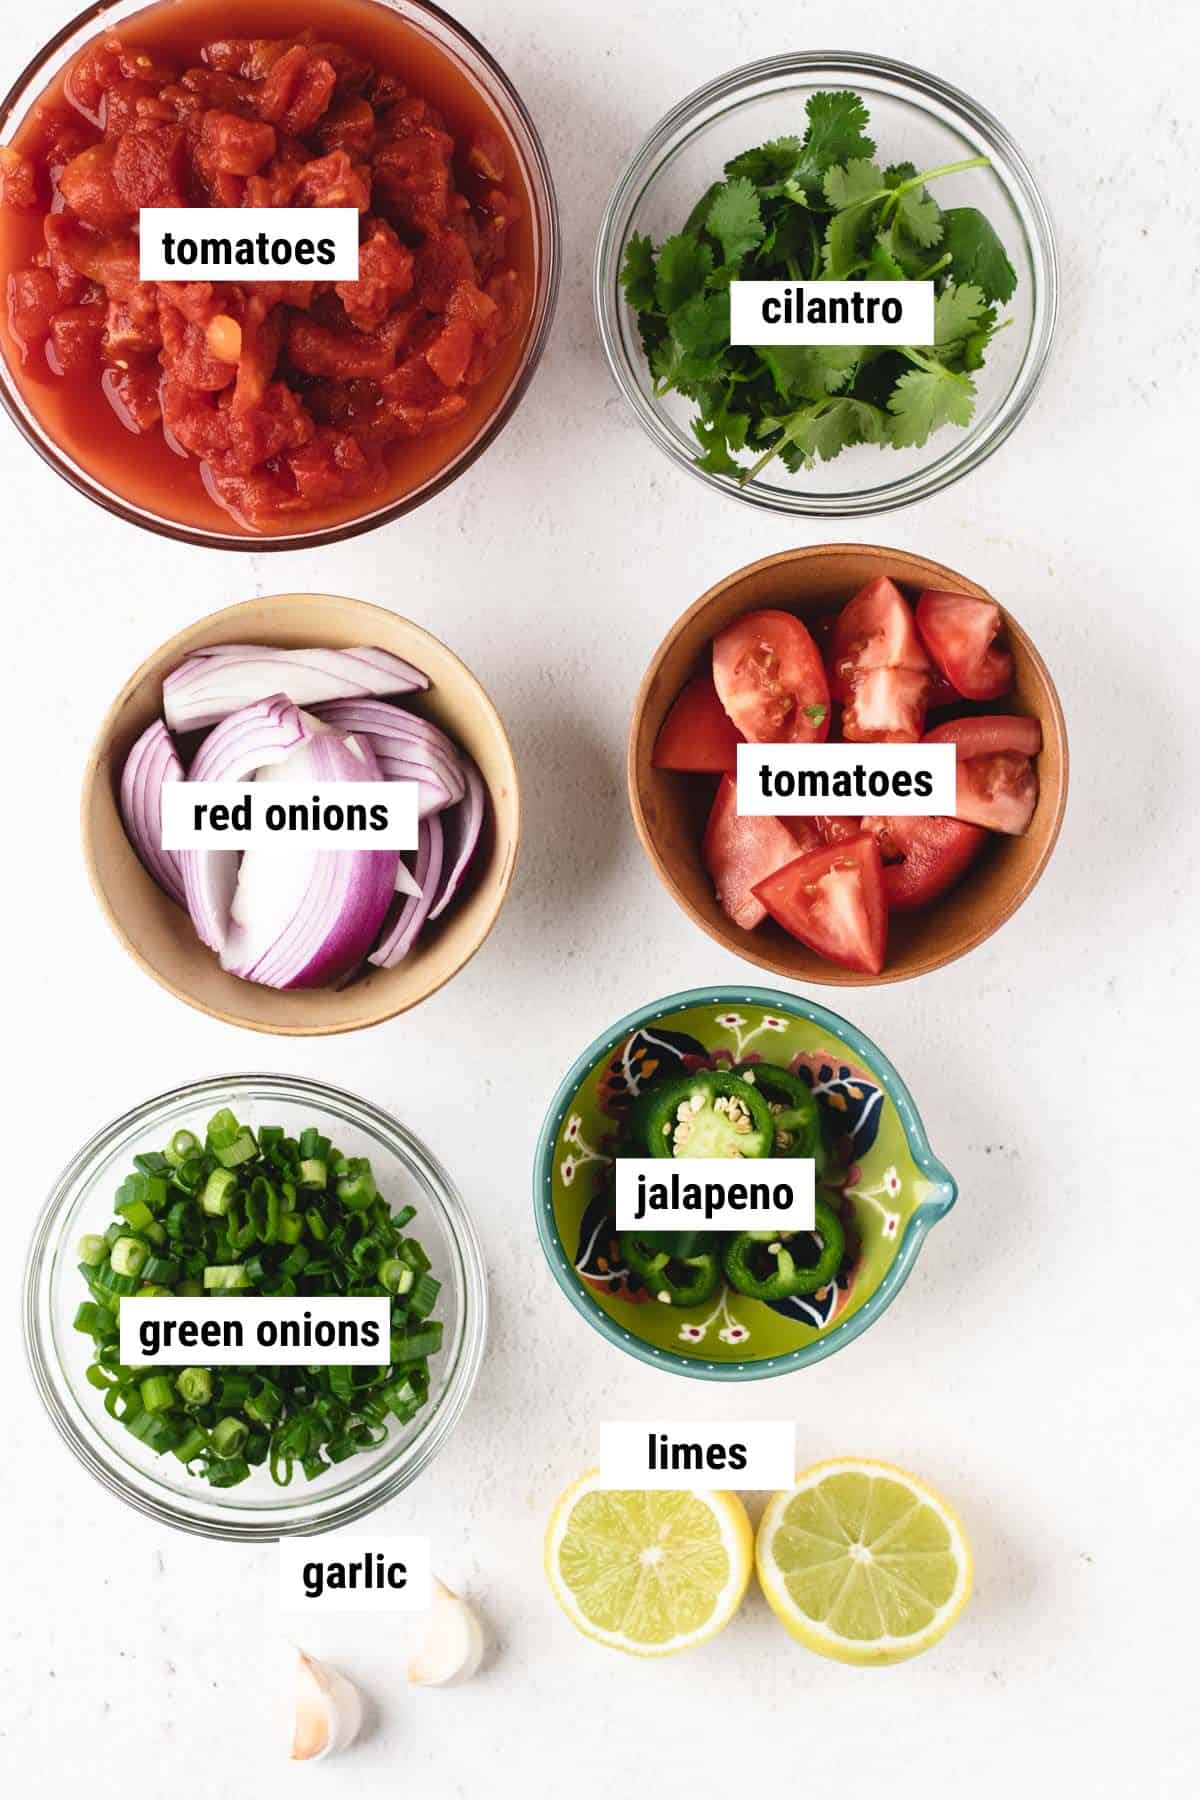 Photo of salsa ingredients including tomatoes, cilantro, onions, jalapeno, garlic, and limes.